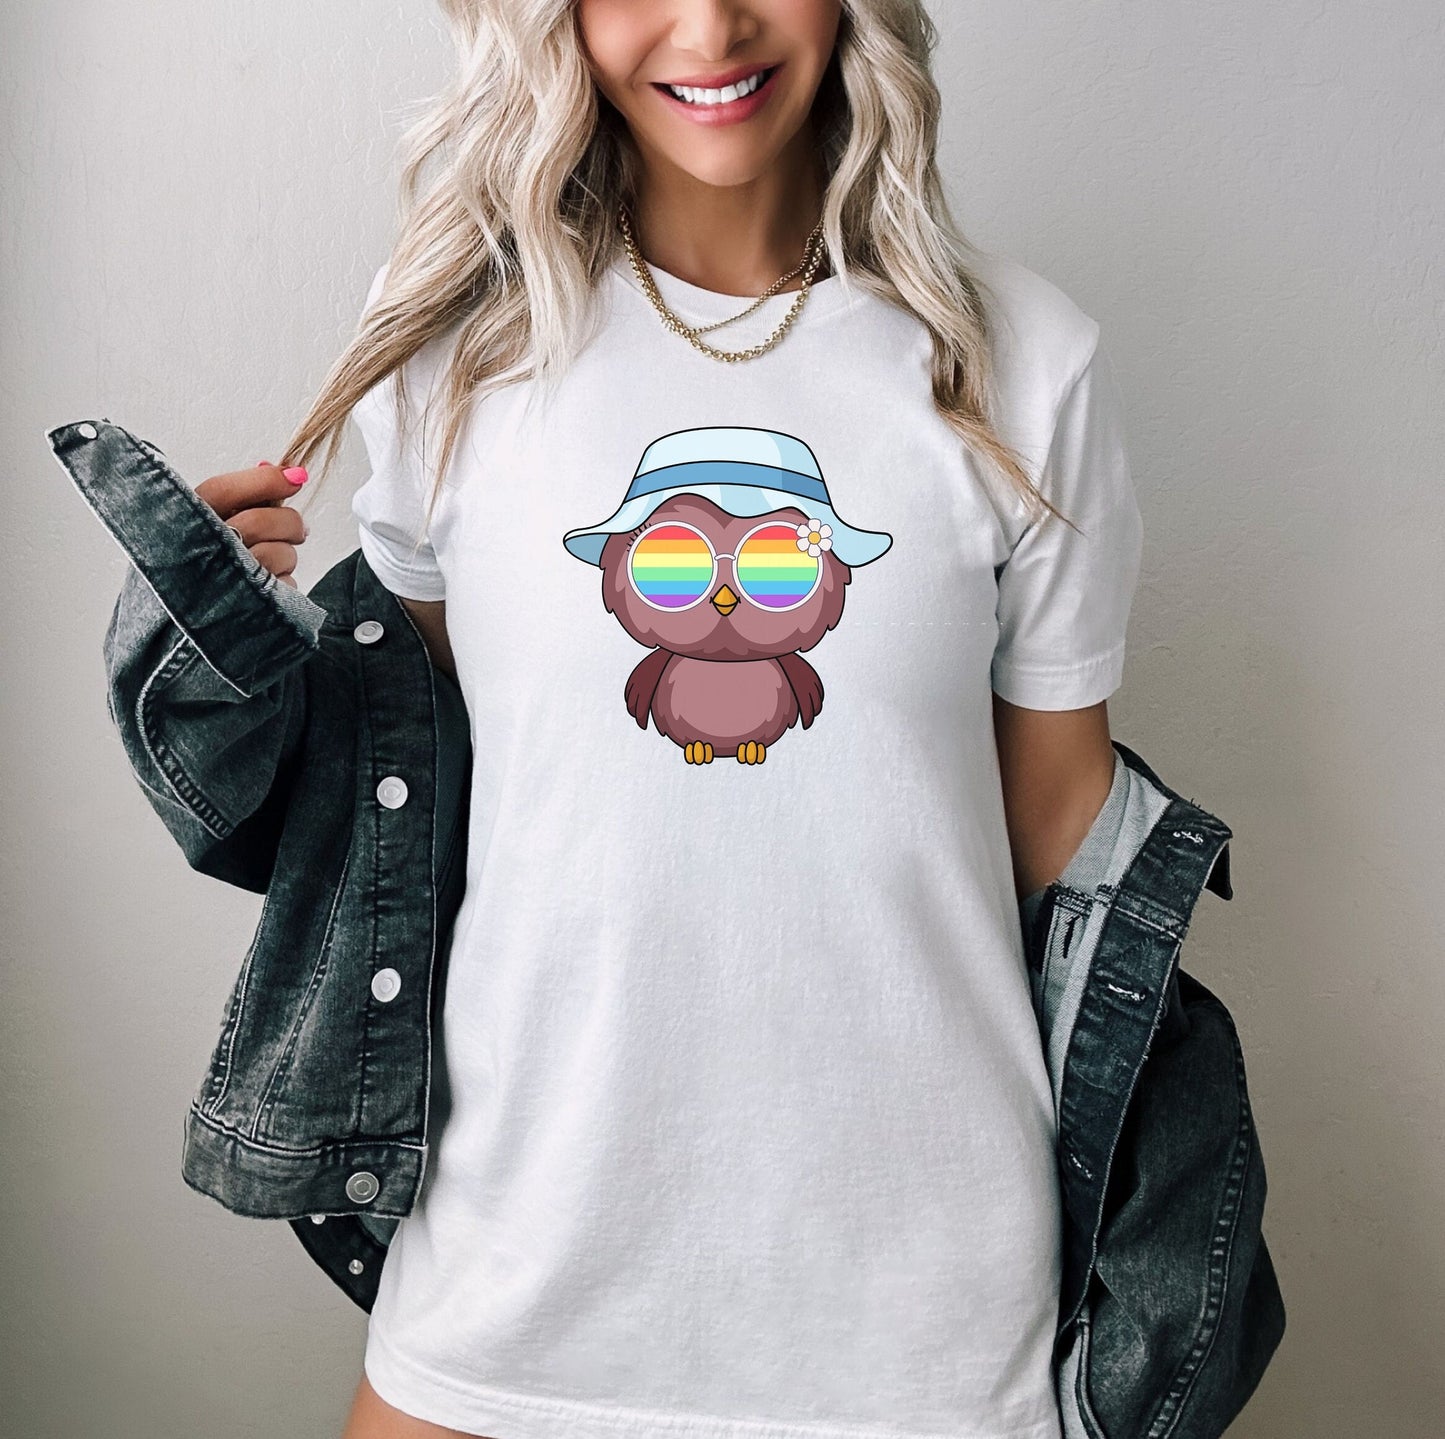 Super cute owl with rainbow glasses shirt blue hat, Rainbow glasses on an adorable owl, precious owl showing off pride. Beautiful pride owl